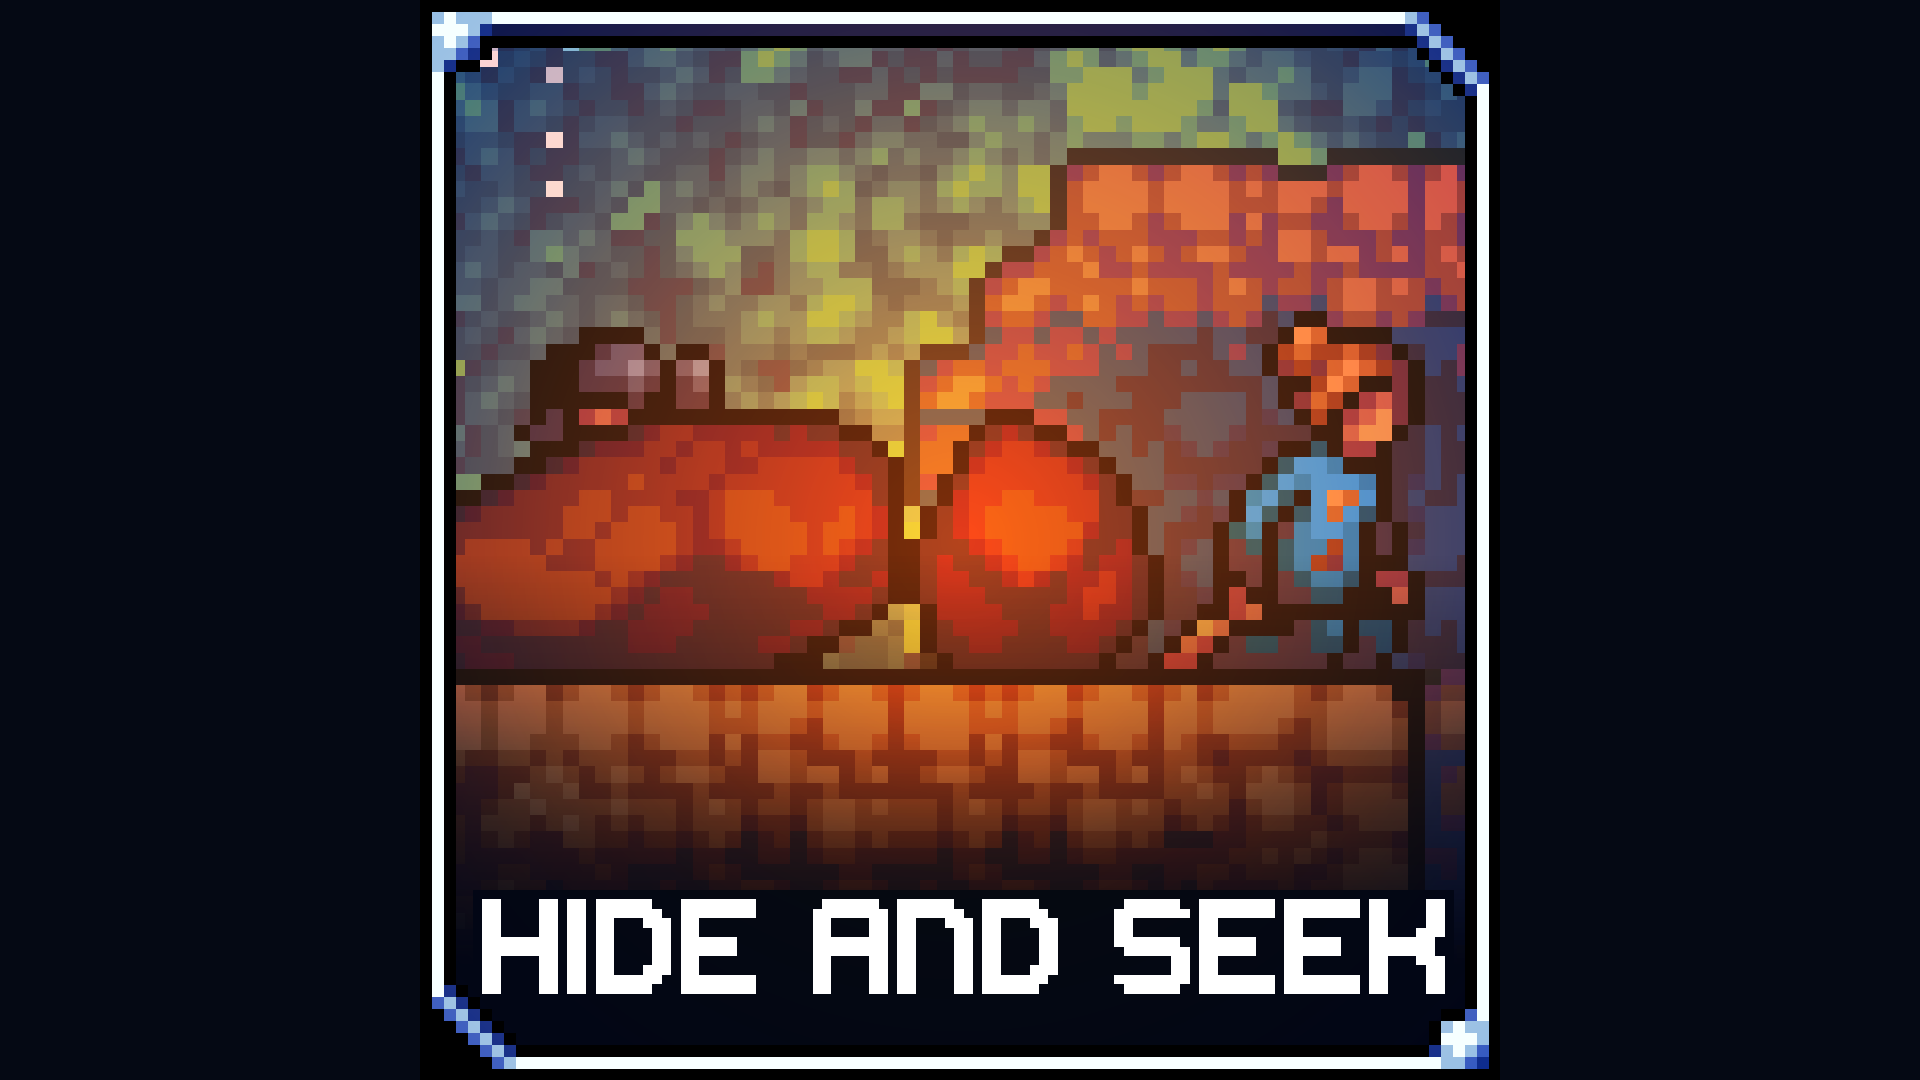 Icon for Hide and Seek